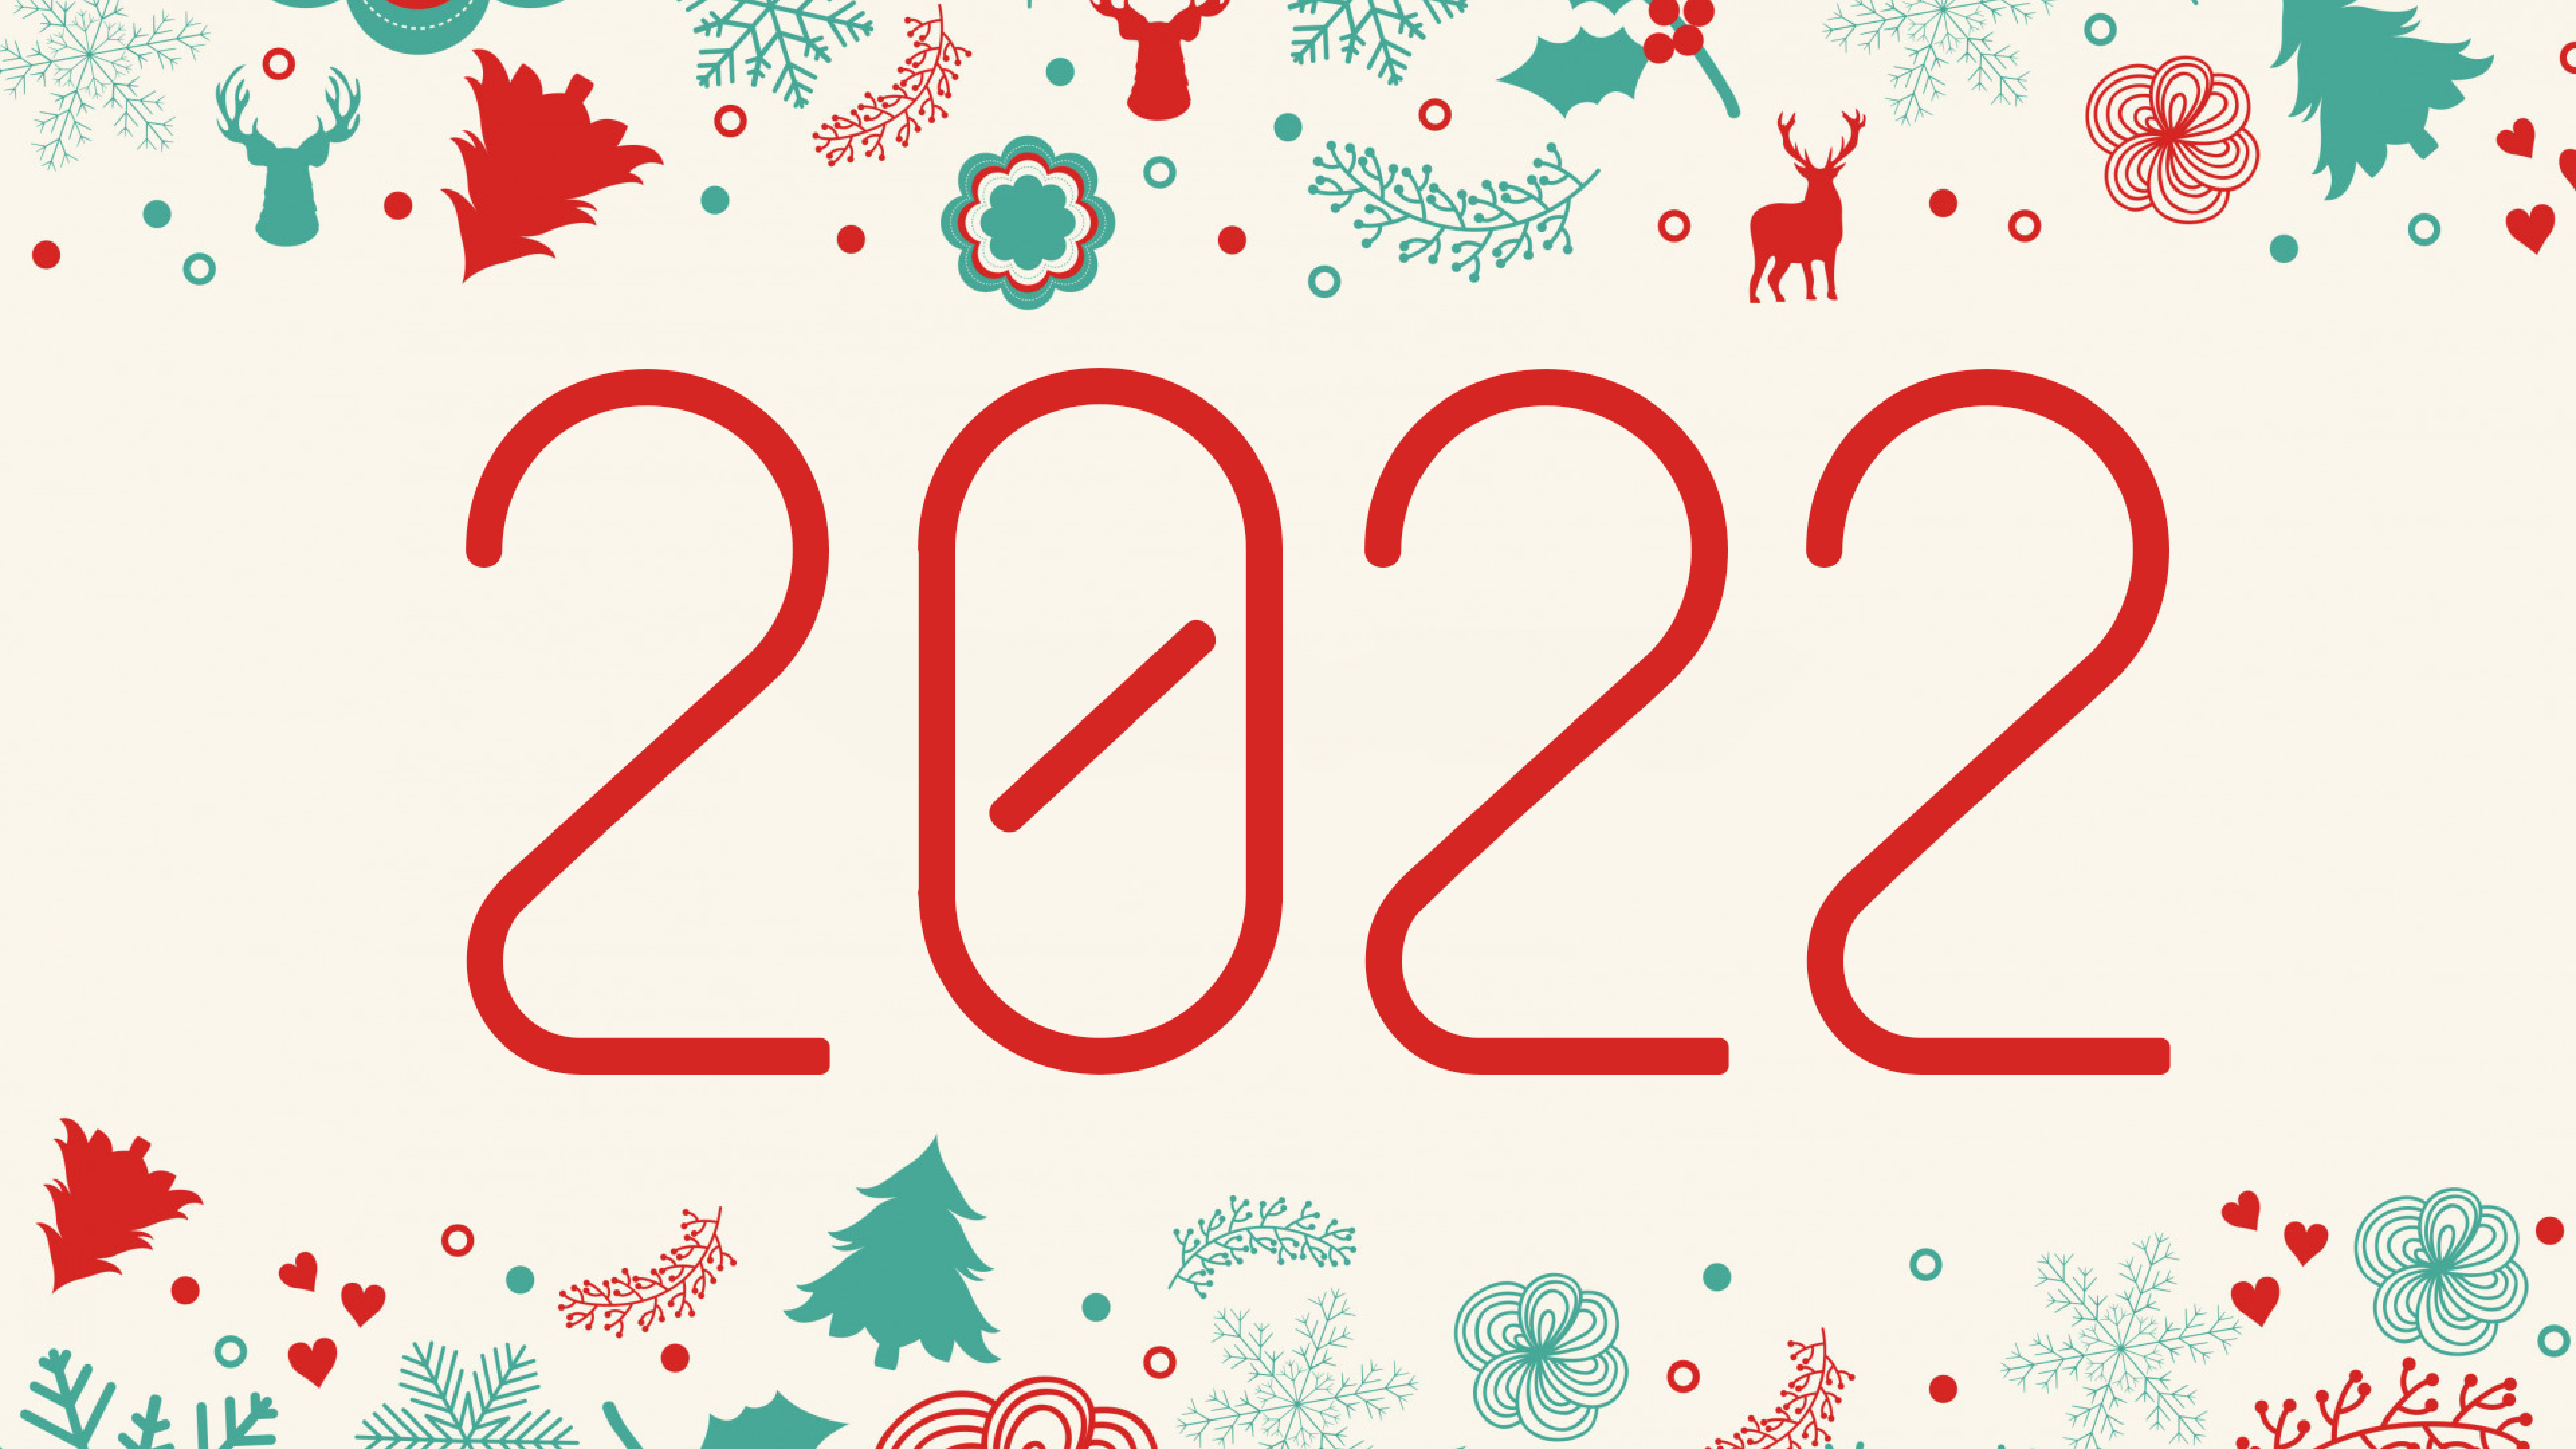 3840x2160 New Year 2022 Greeting 4K Wallpaper, HD Holidays 4K Wallpapers,  Images, Photos and Background - Wallpapers Den